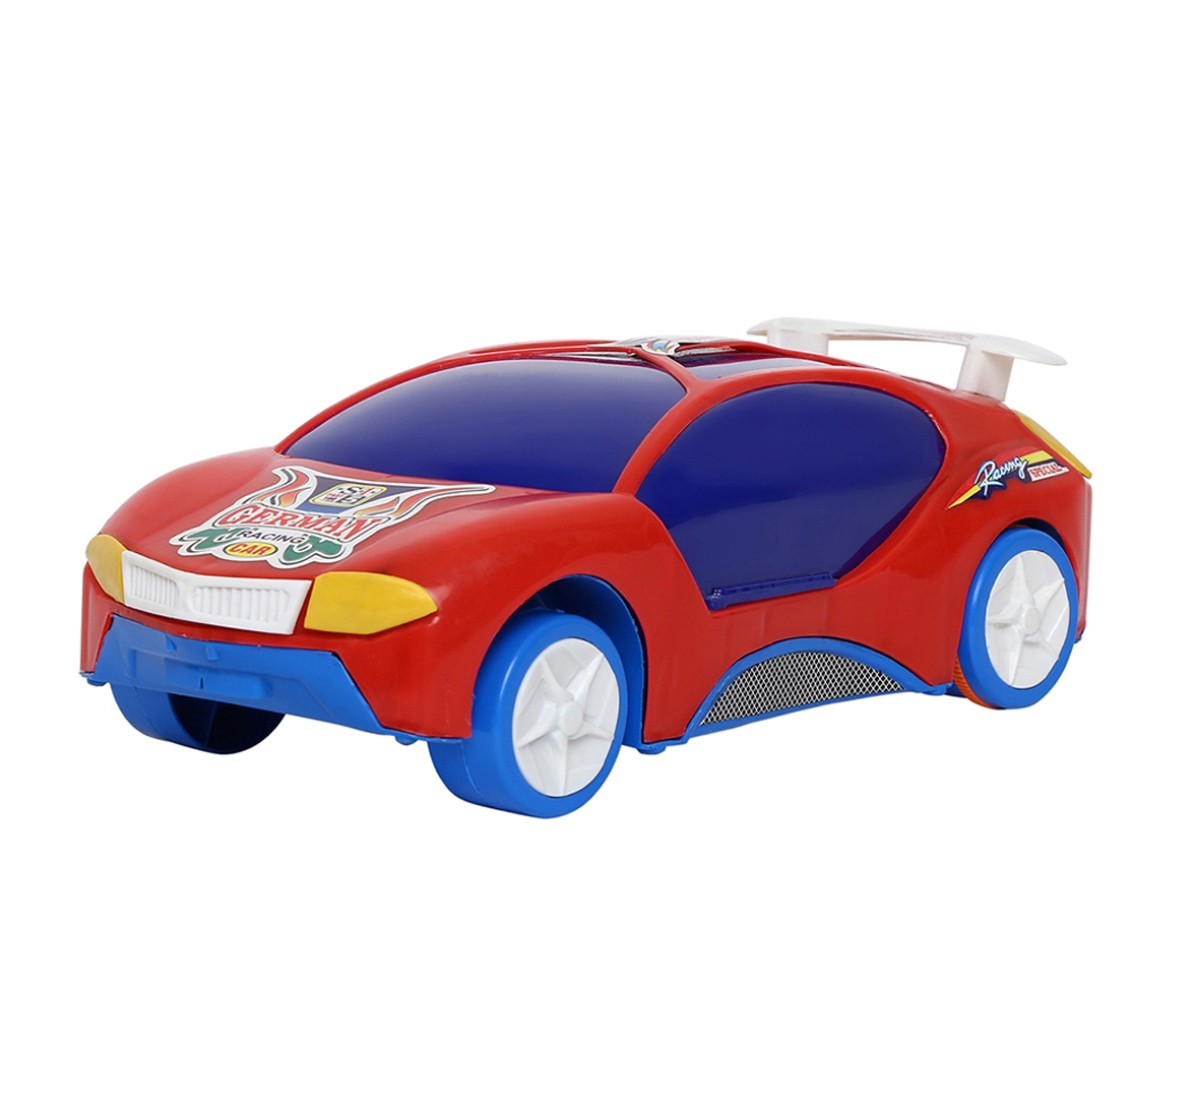 Toyspree Friction Powered German Car for Kids, 18M+ (Multicolor)